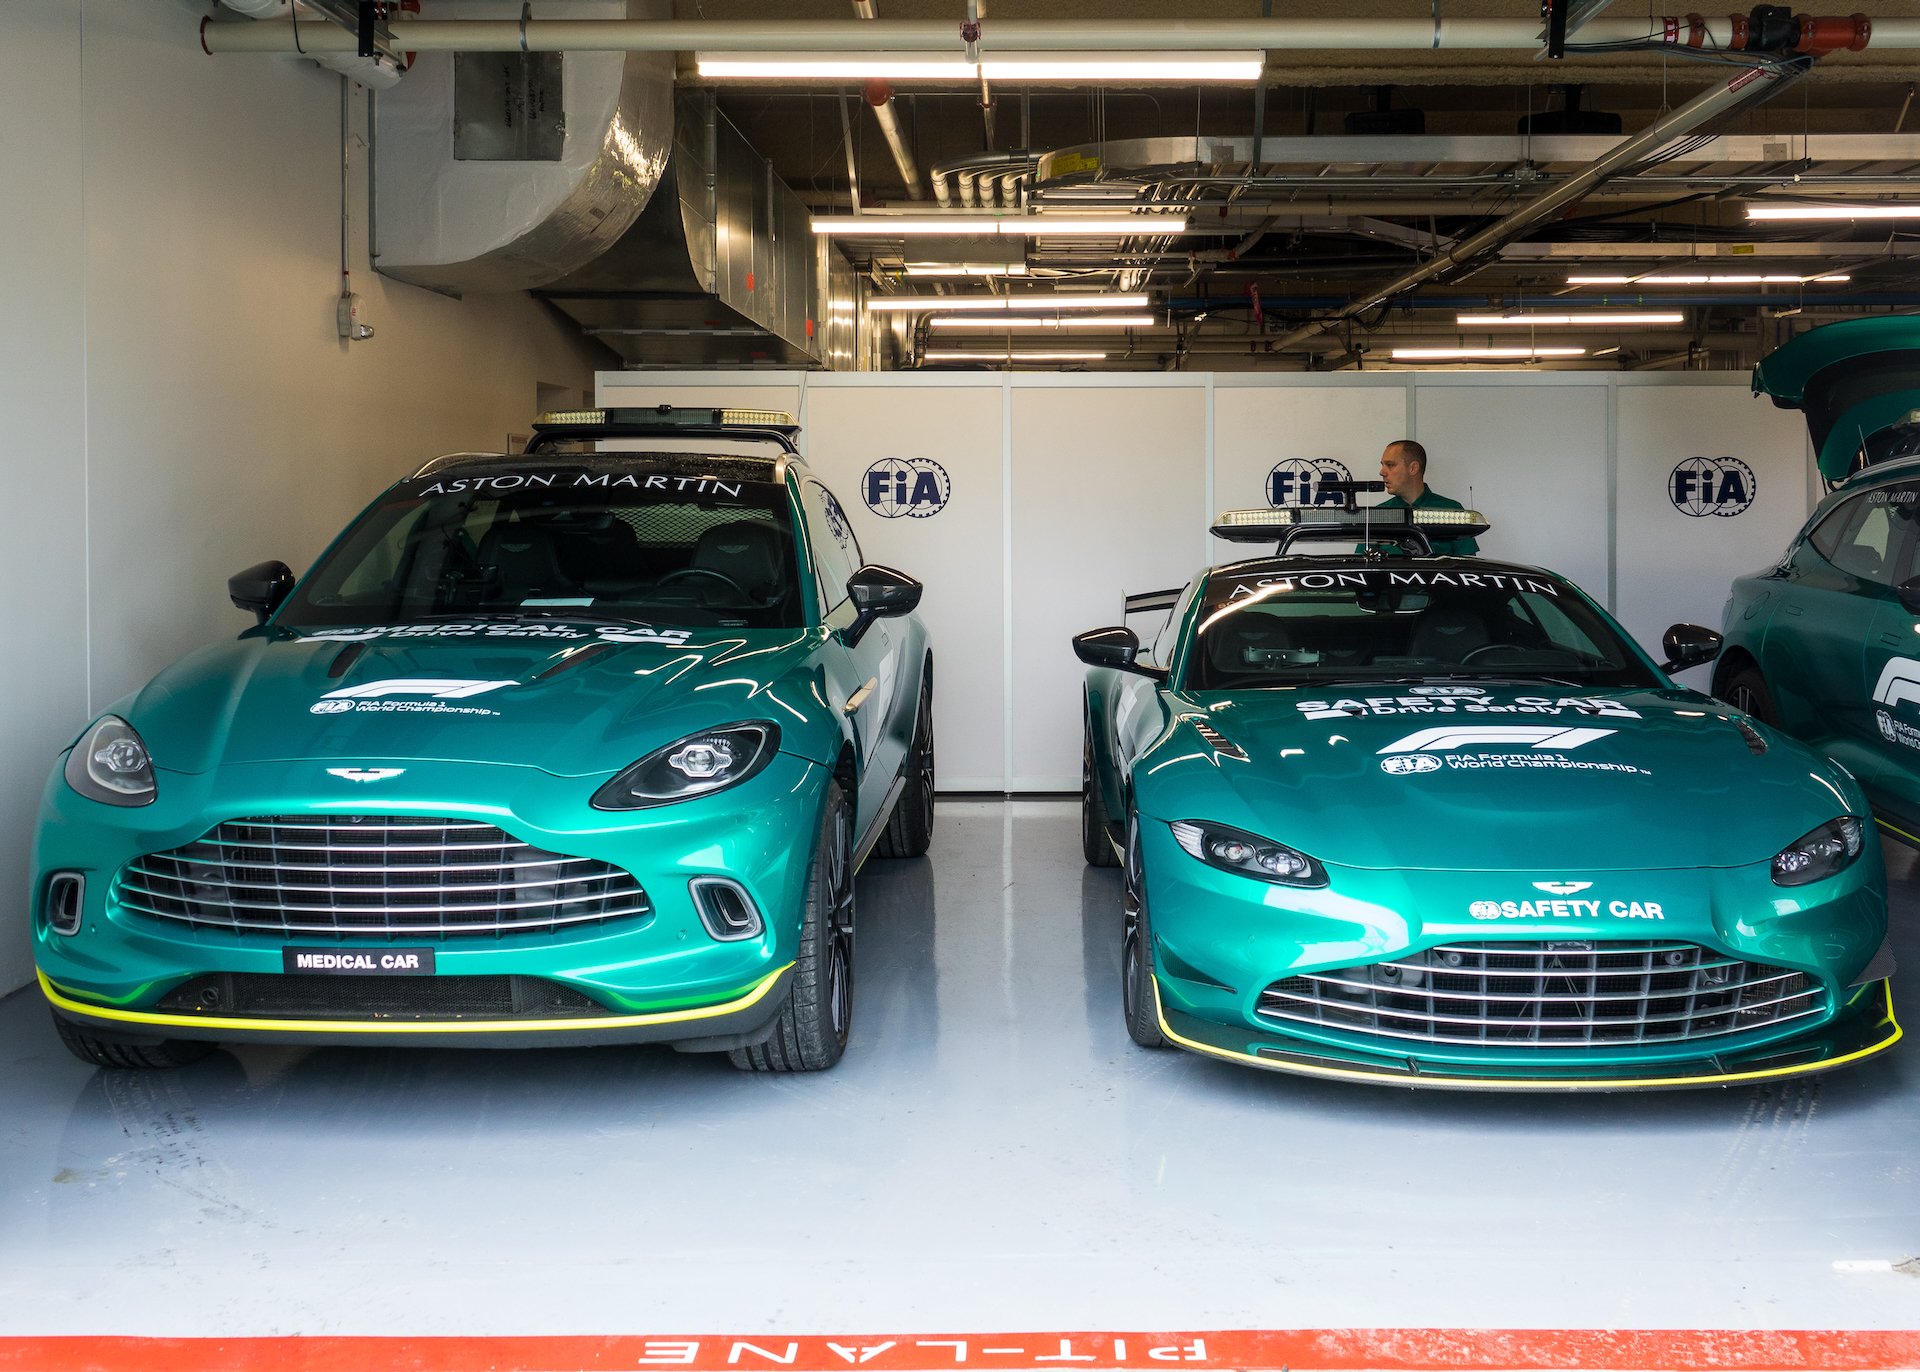  Medical car (left) and safety car (right)… so pretty! 